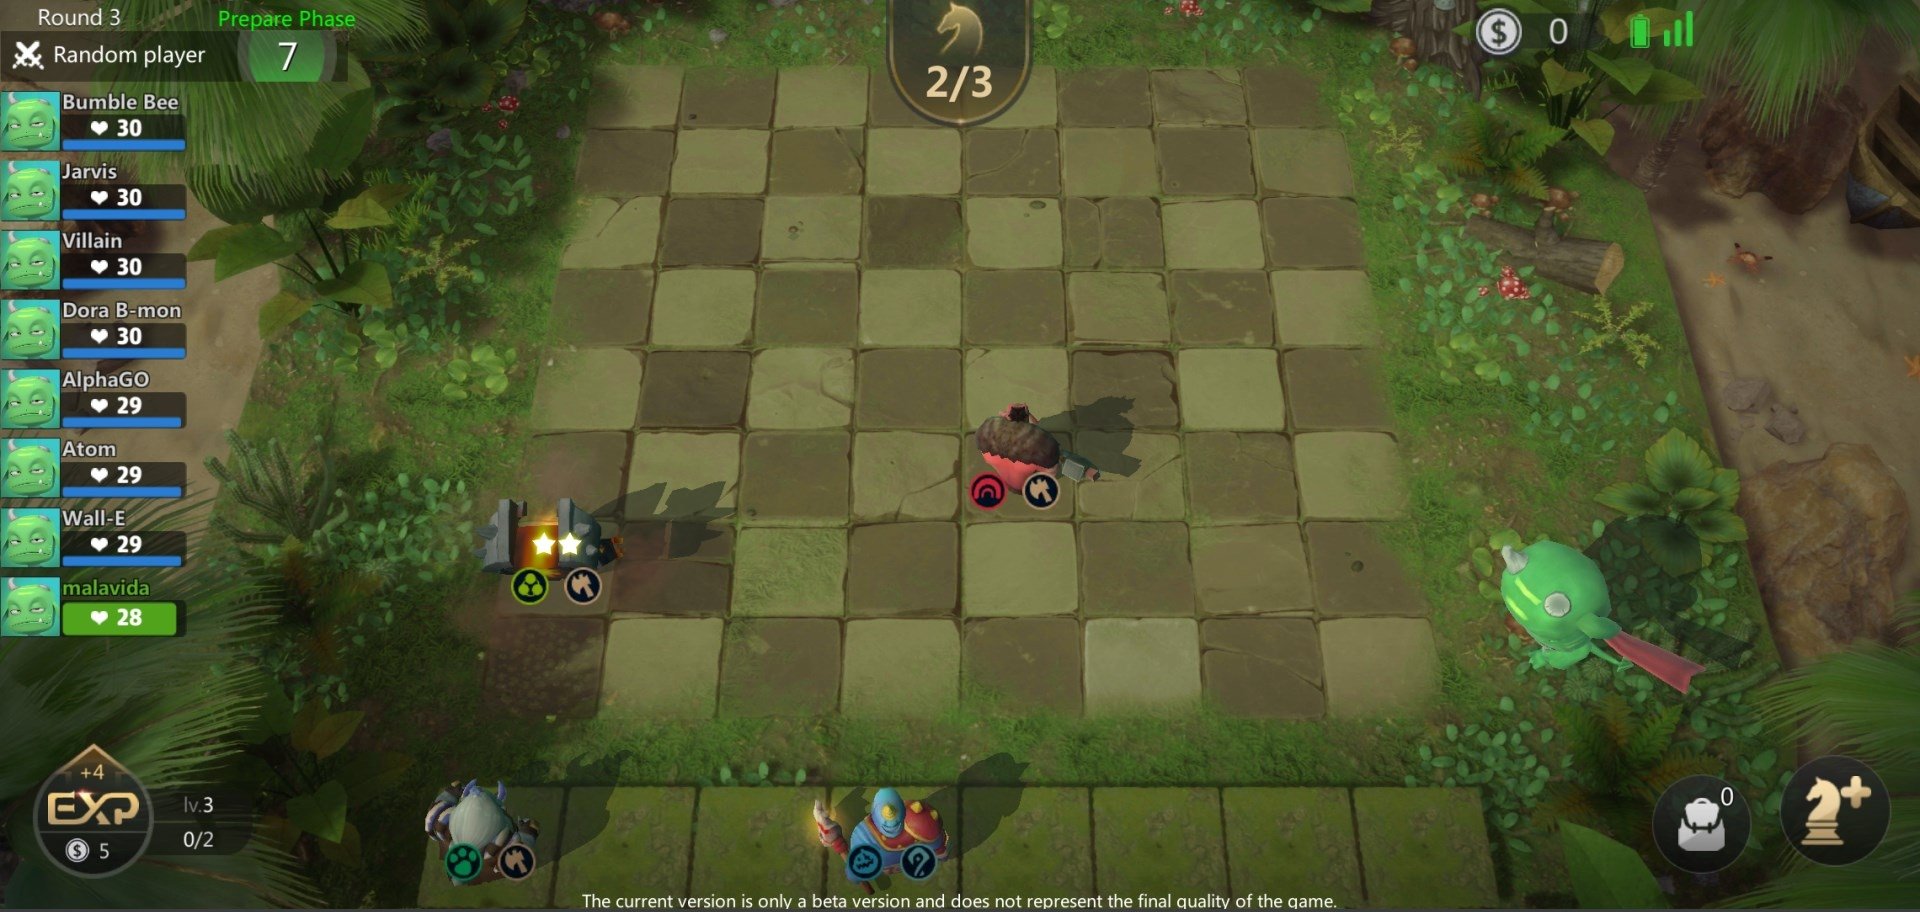 Auto Chess – Alpha Sign Up